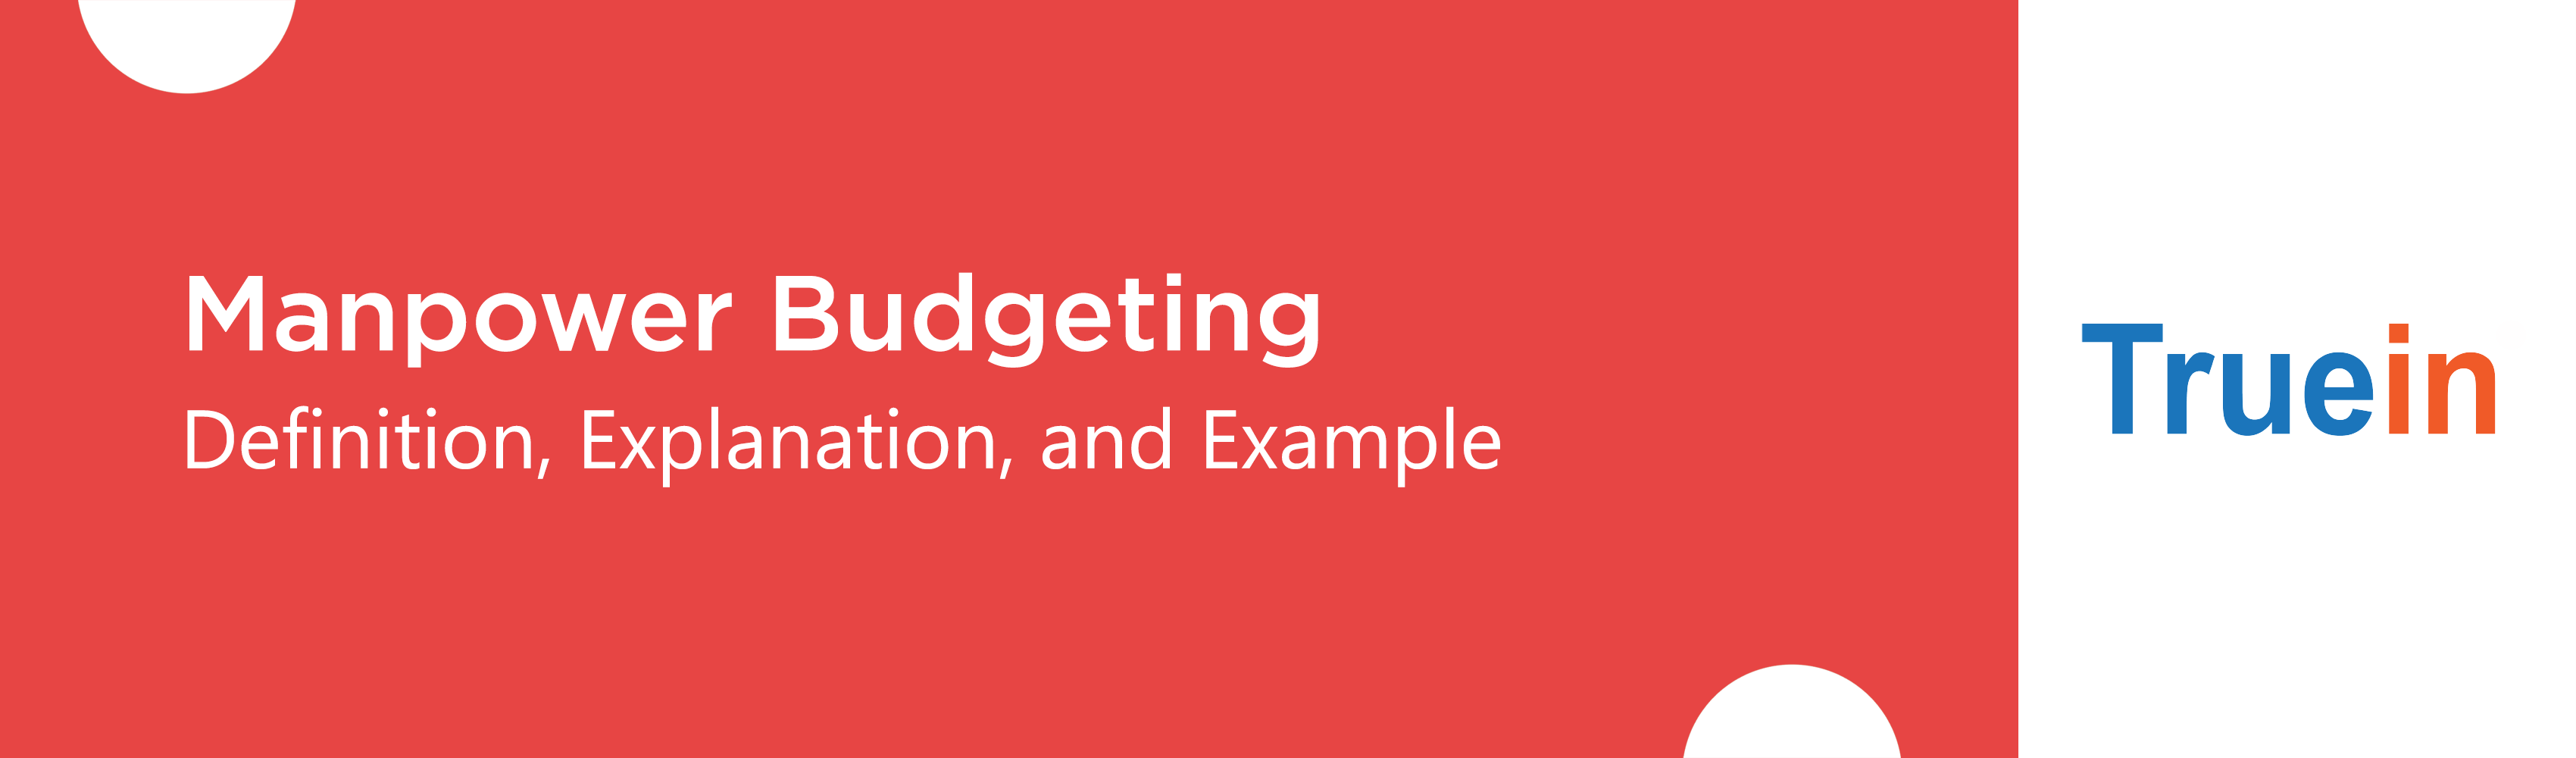 Manpower Budgeting - Definition, Explanation, and Example